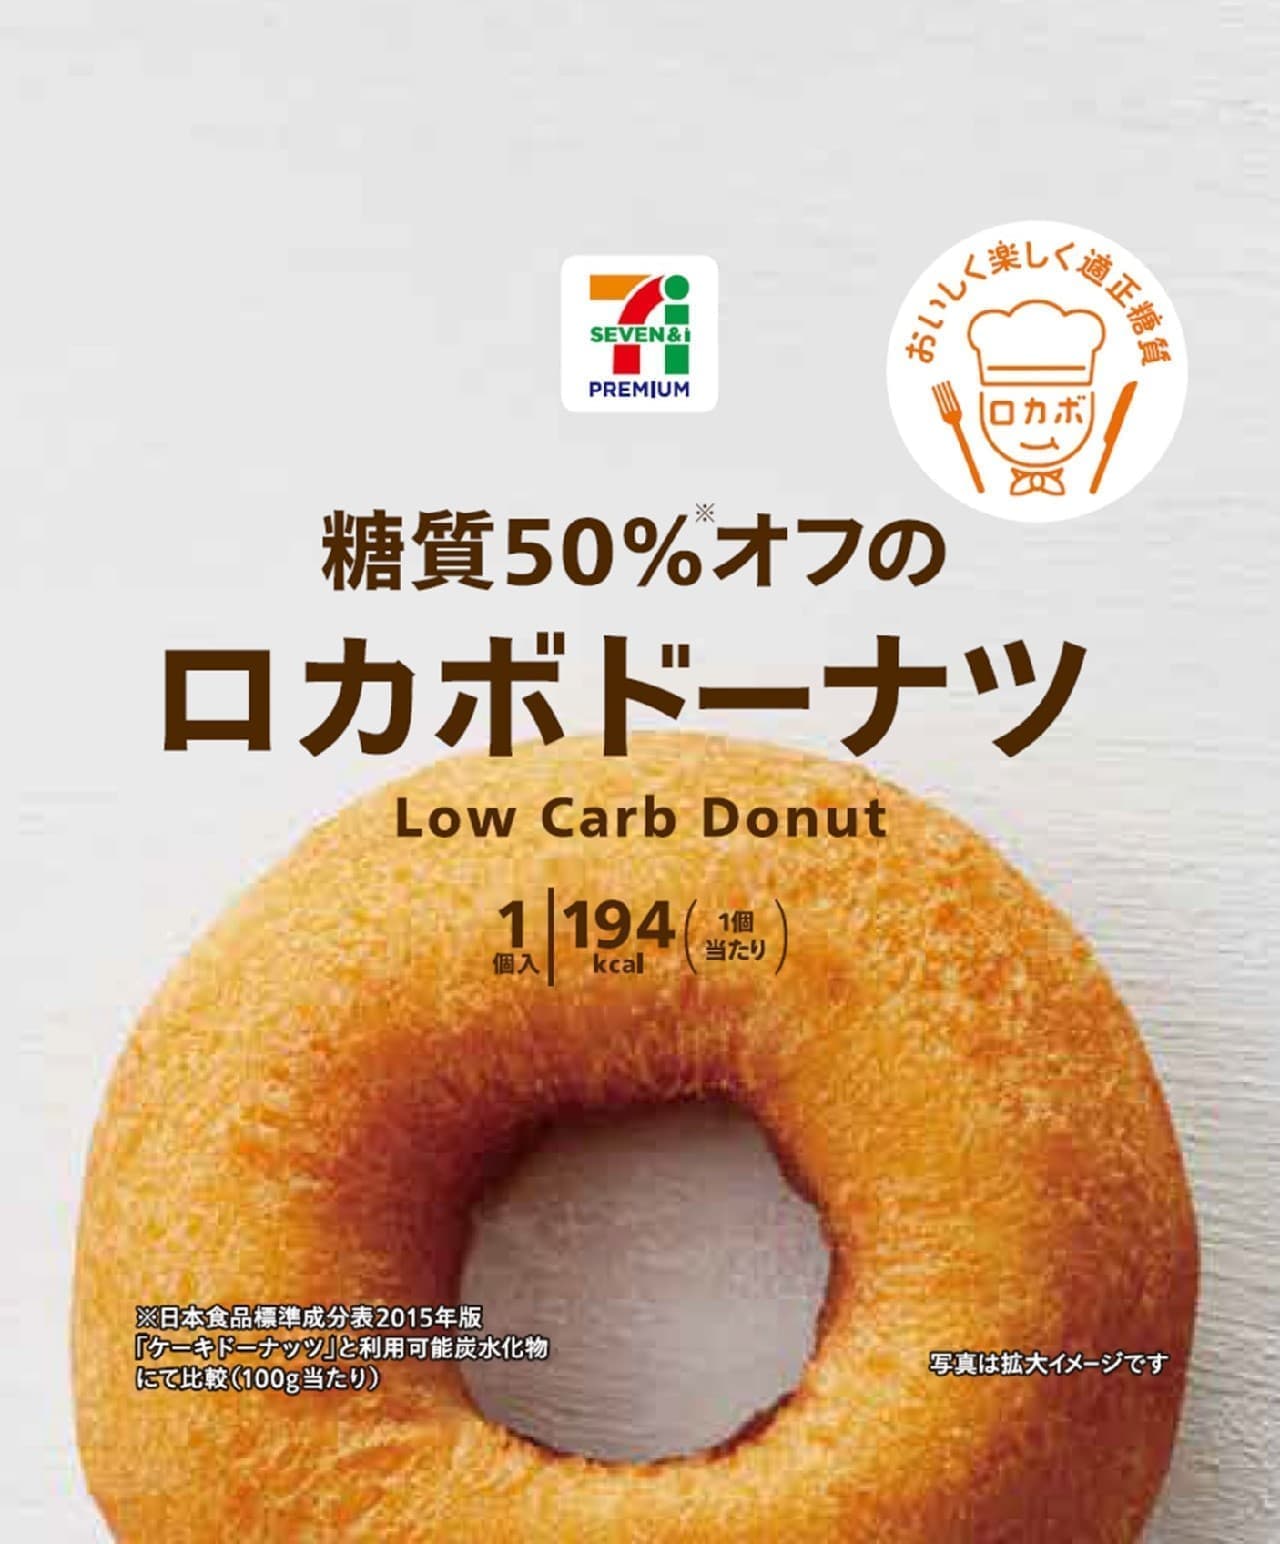 7-ELEVEN Premium Low-Carb Donuts with 50% Off Sugar